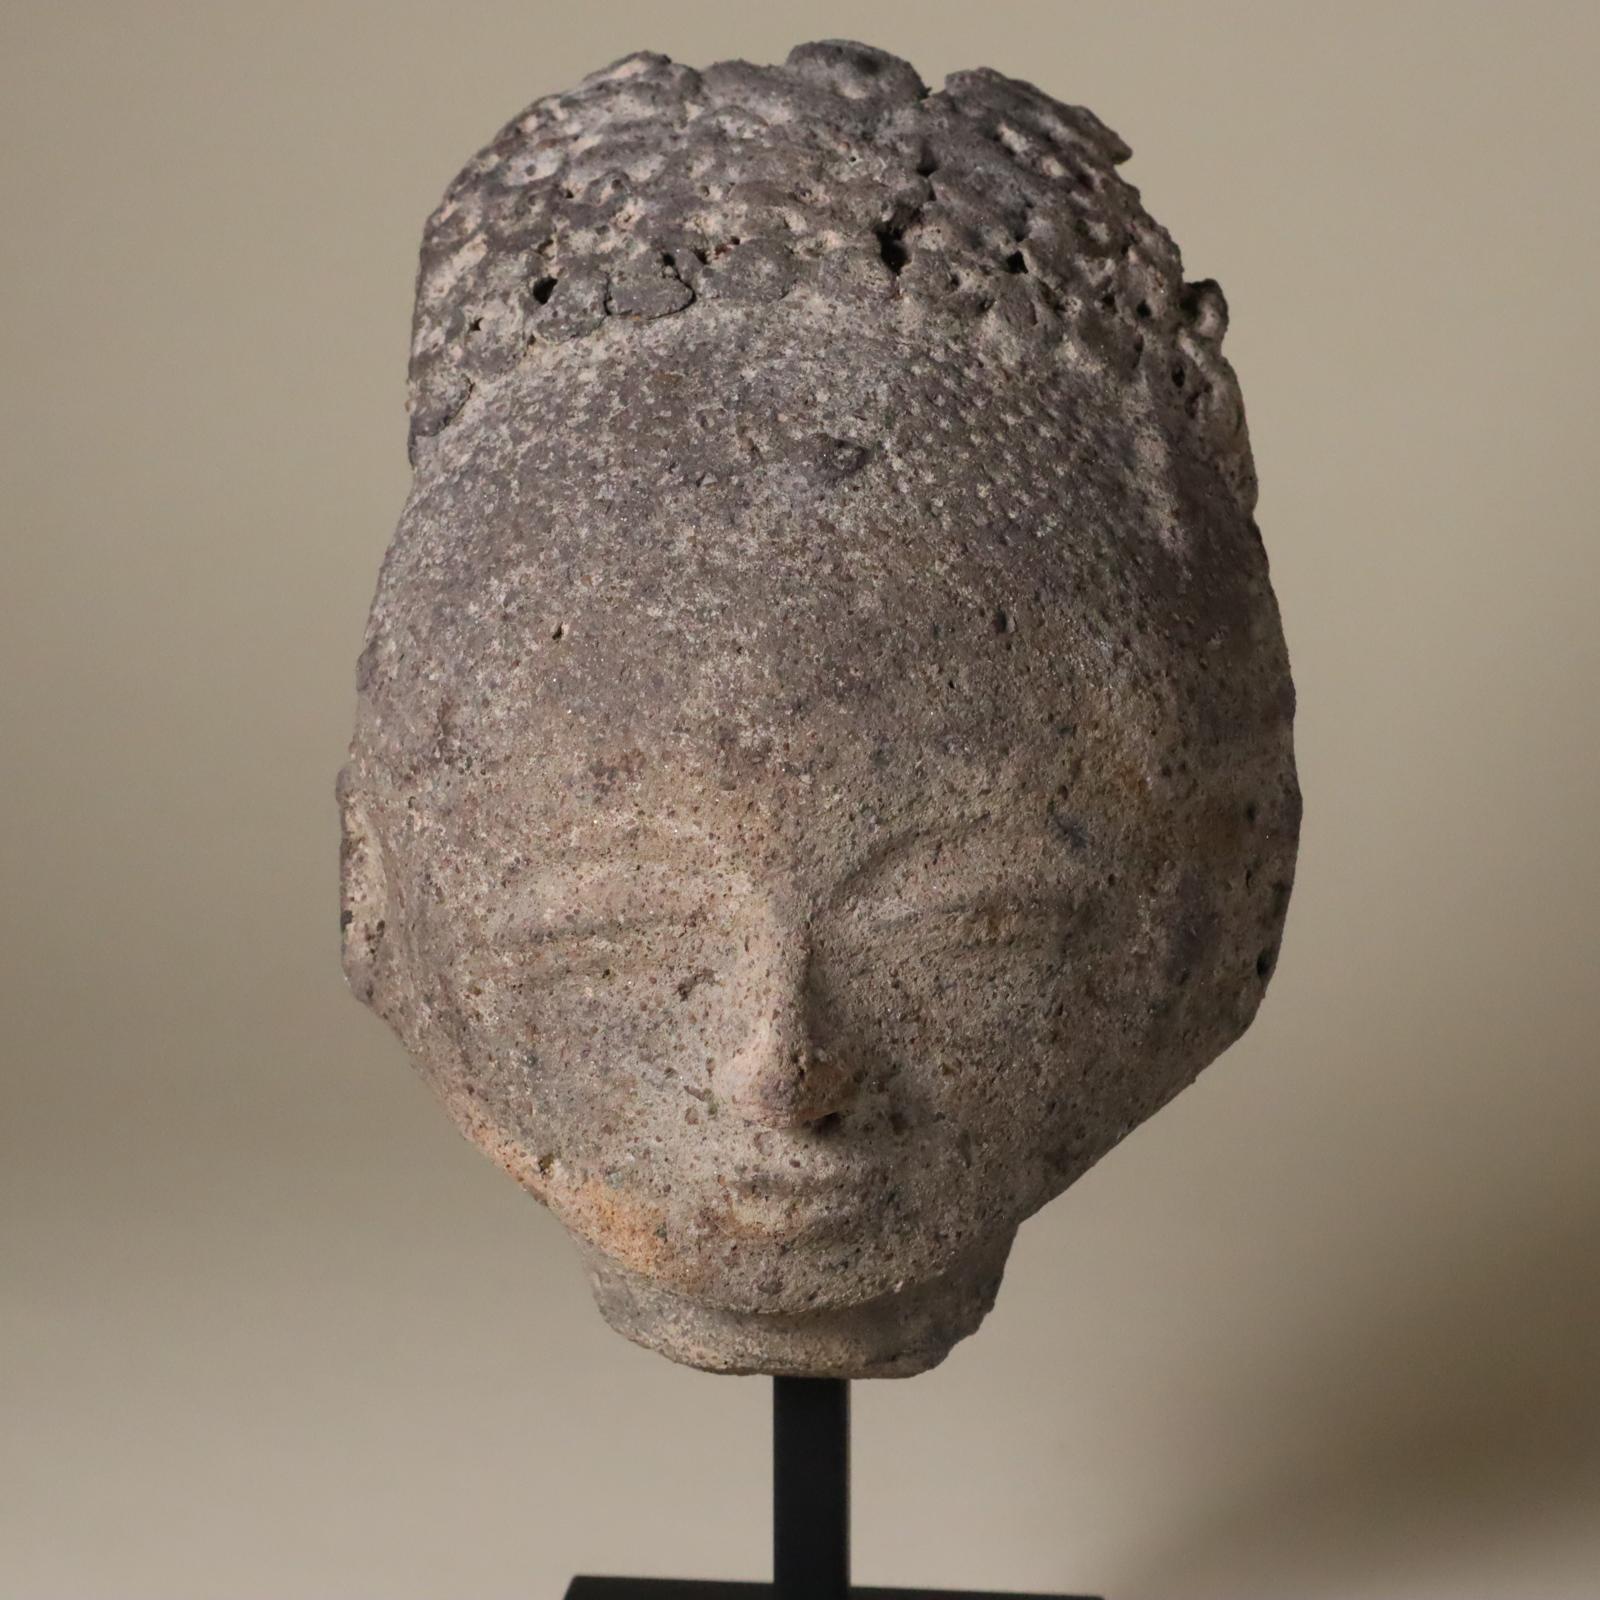 Store closing March 31. This is an earthenware or terracotta portrait from the Akan people of Ghana. 19th century or earlier. 
This has a Buddha-like expression of contemplation and peace. The facial features are small delicate. A little little